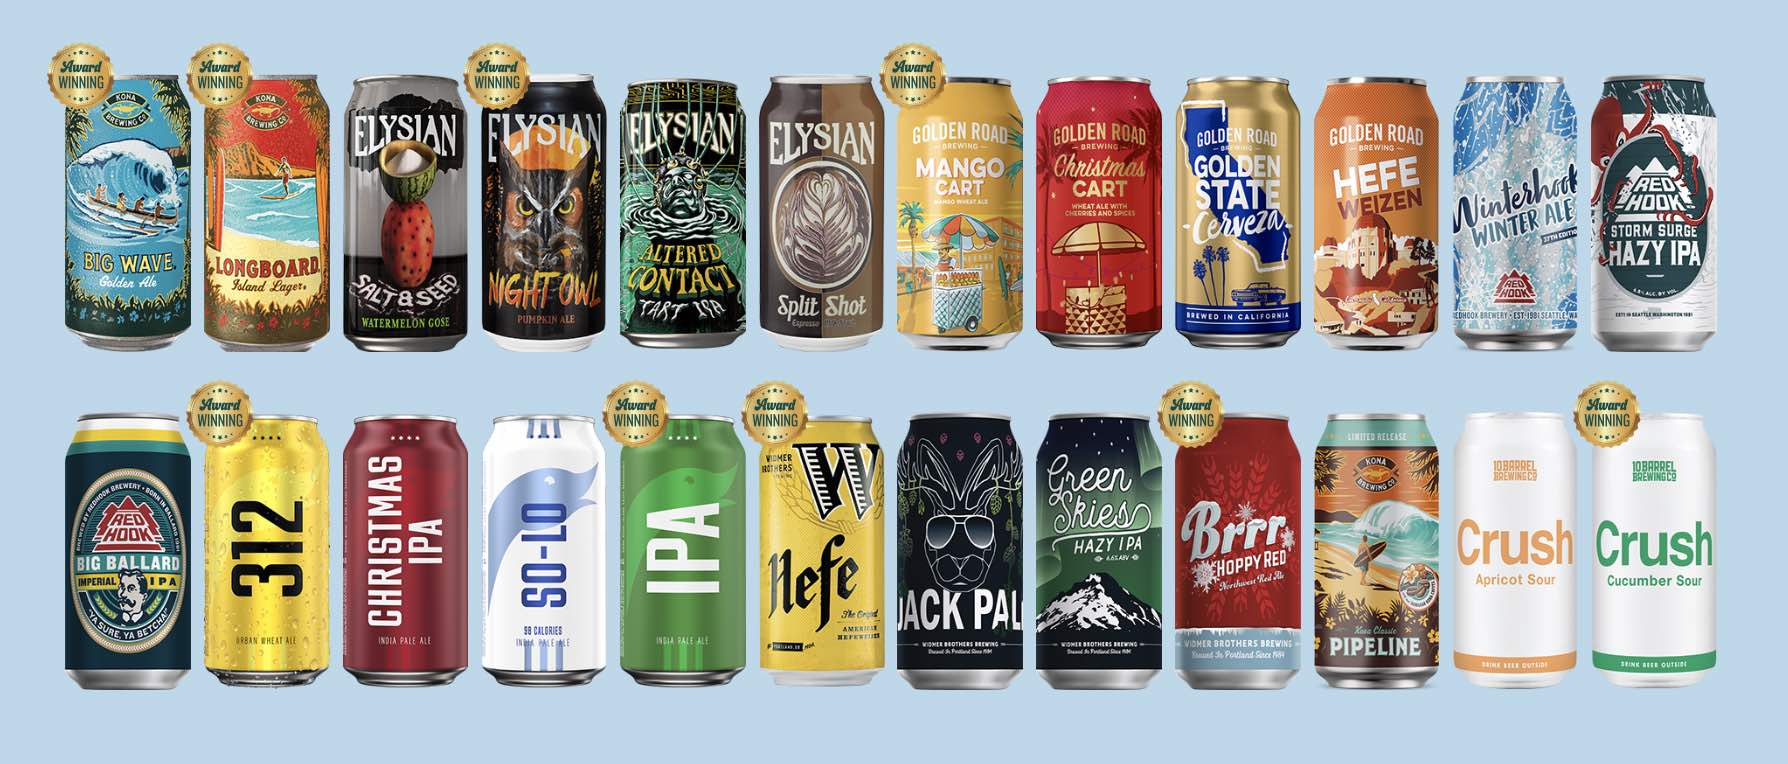 The beers included in the 24 Craft Beers of Cheer Advent Calendar Pack.